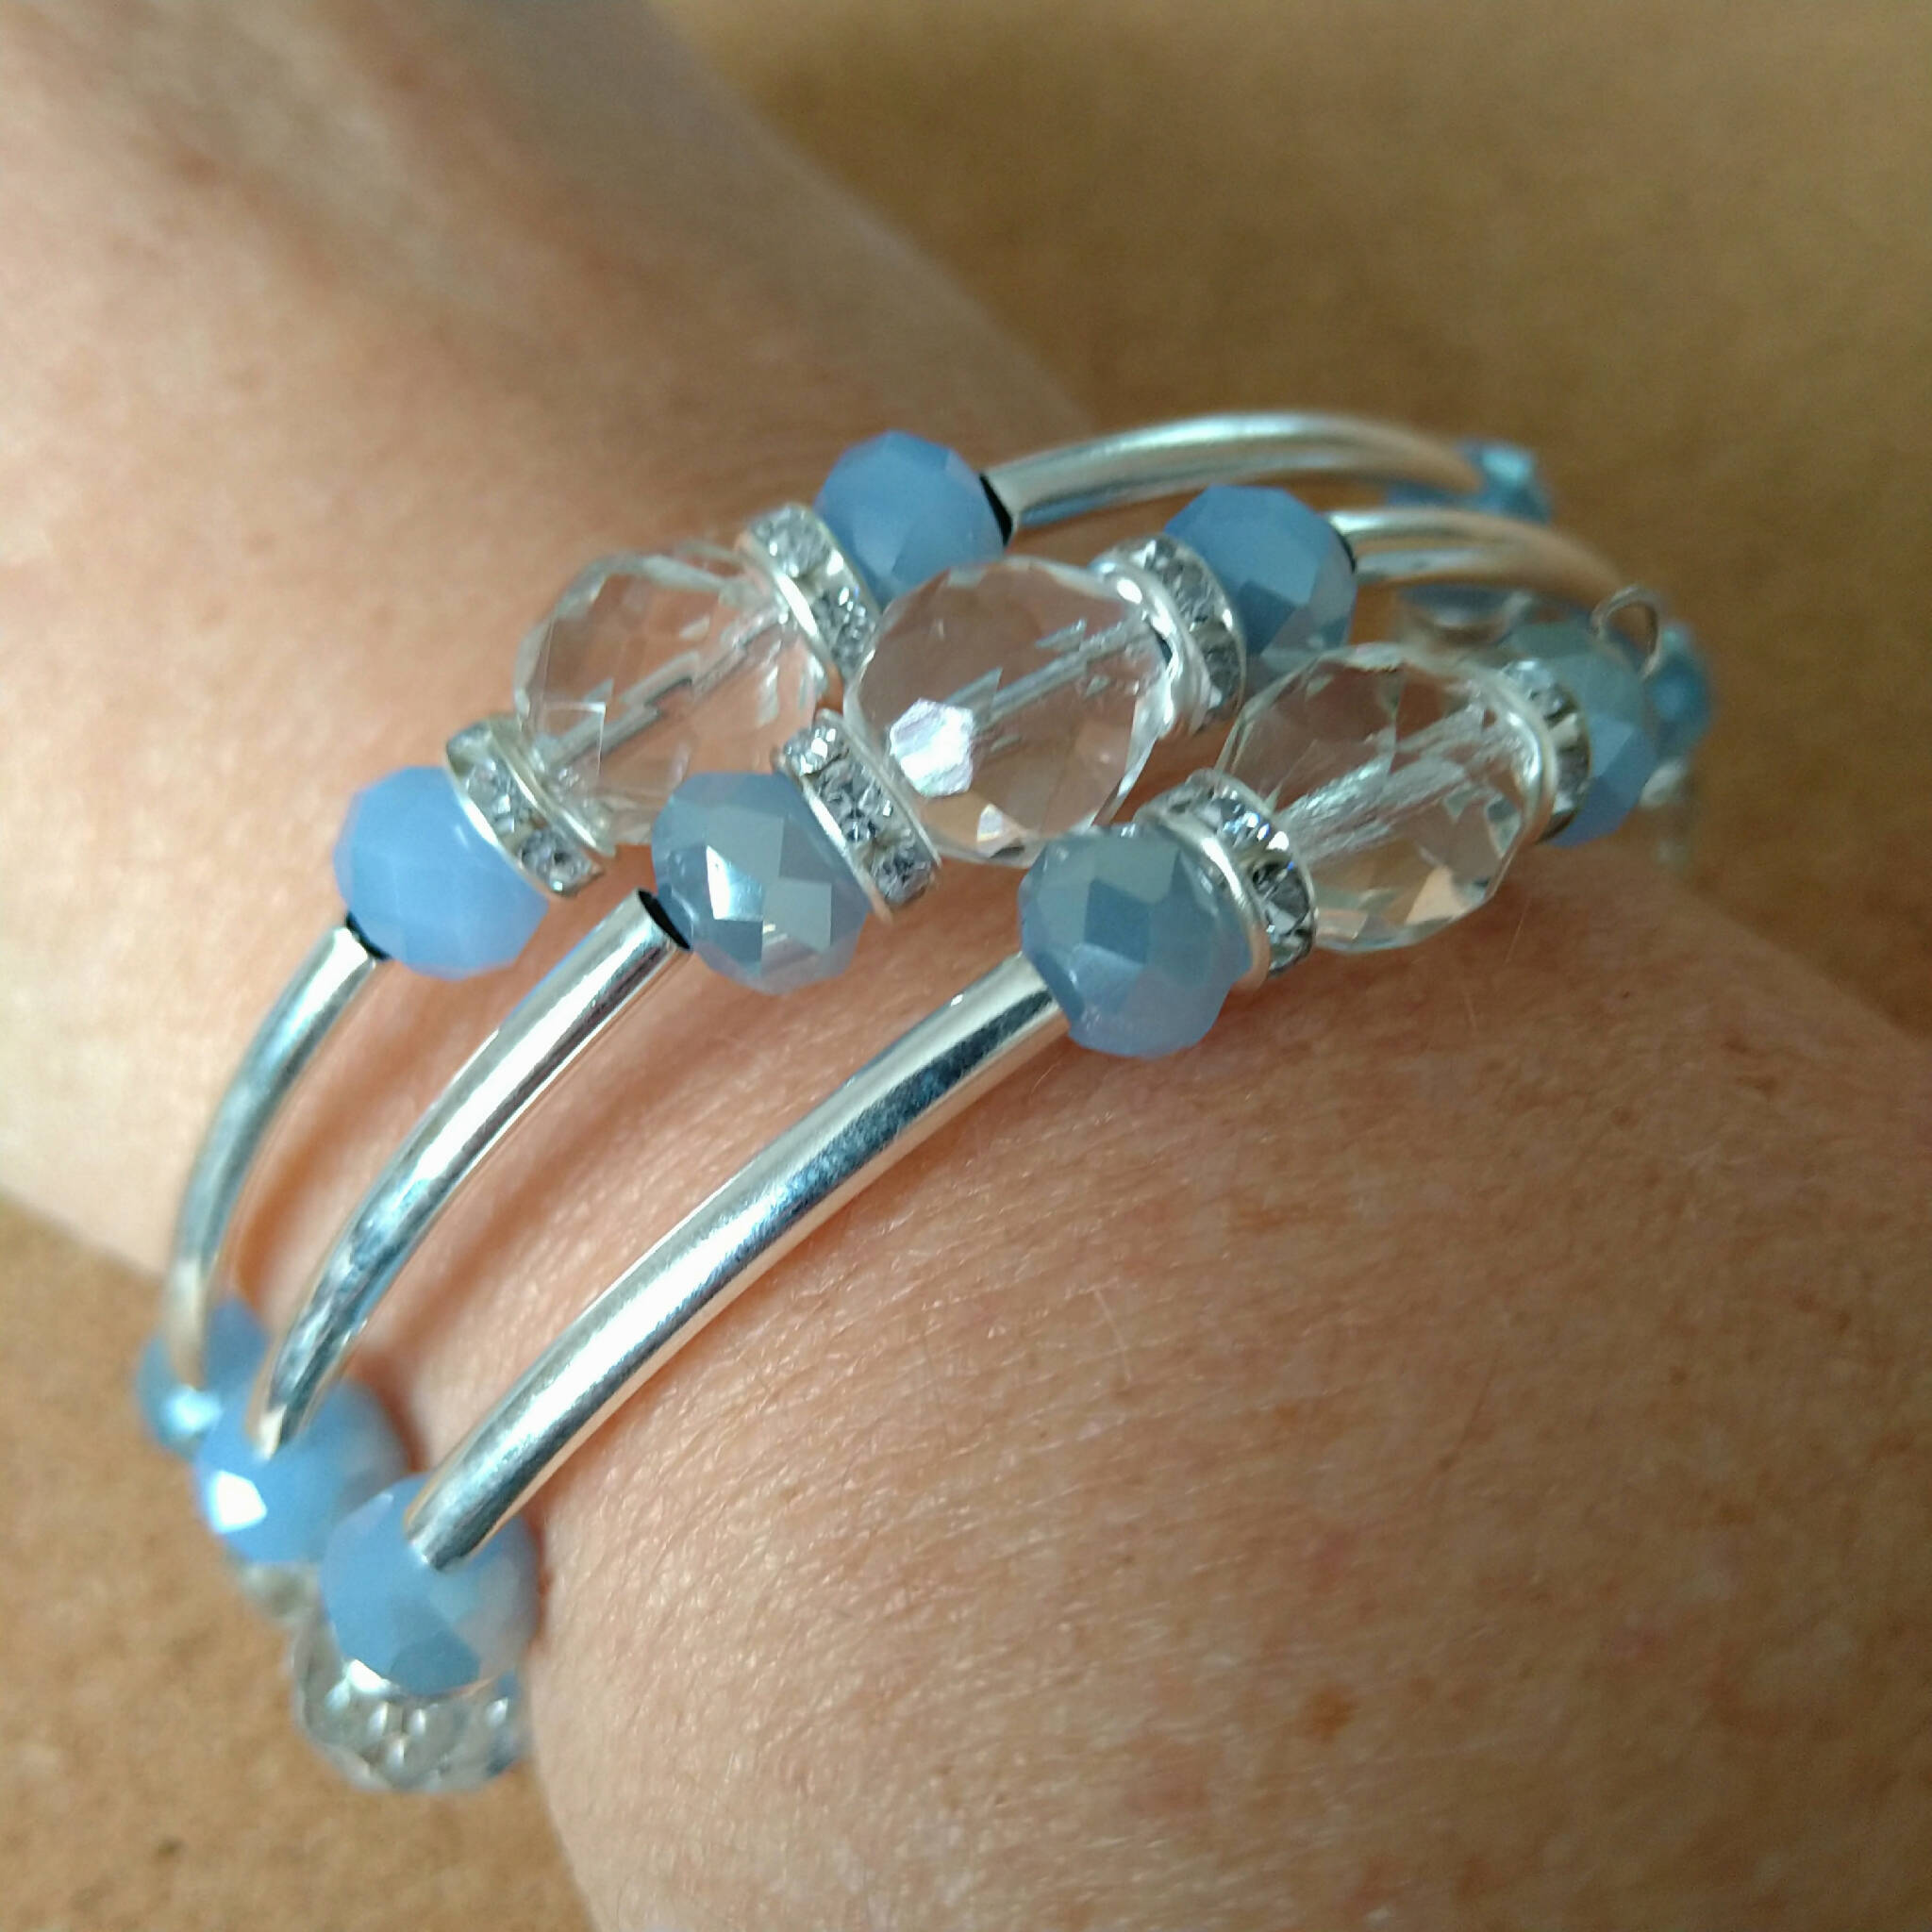 2.5 strand silver toned memory wire bangle with clear & pale blue beads, 6.5cm diameter